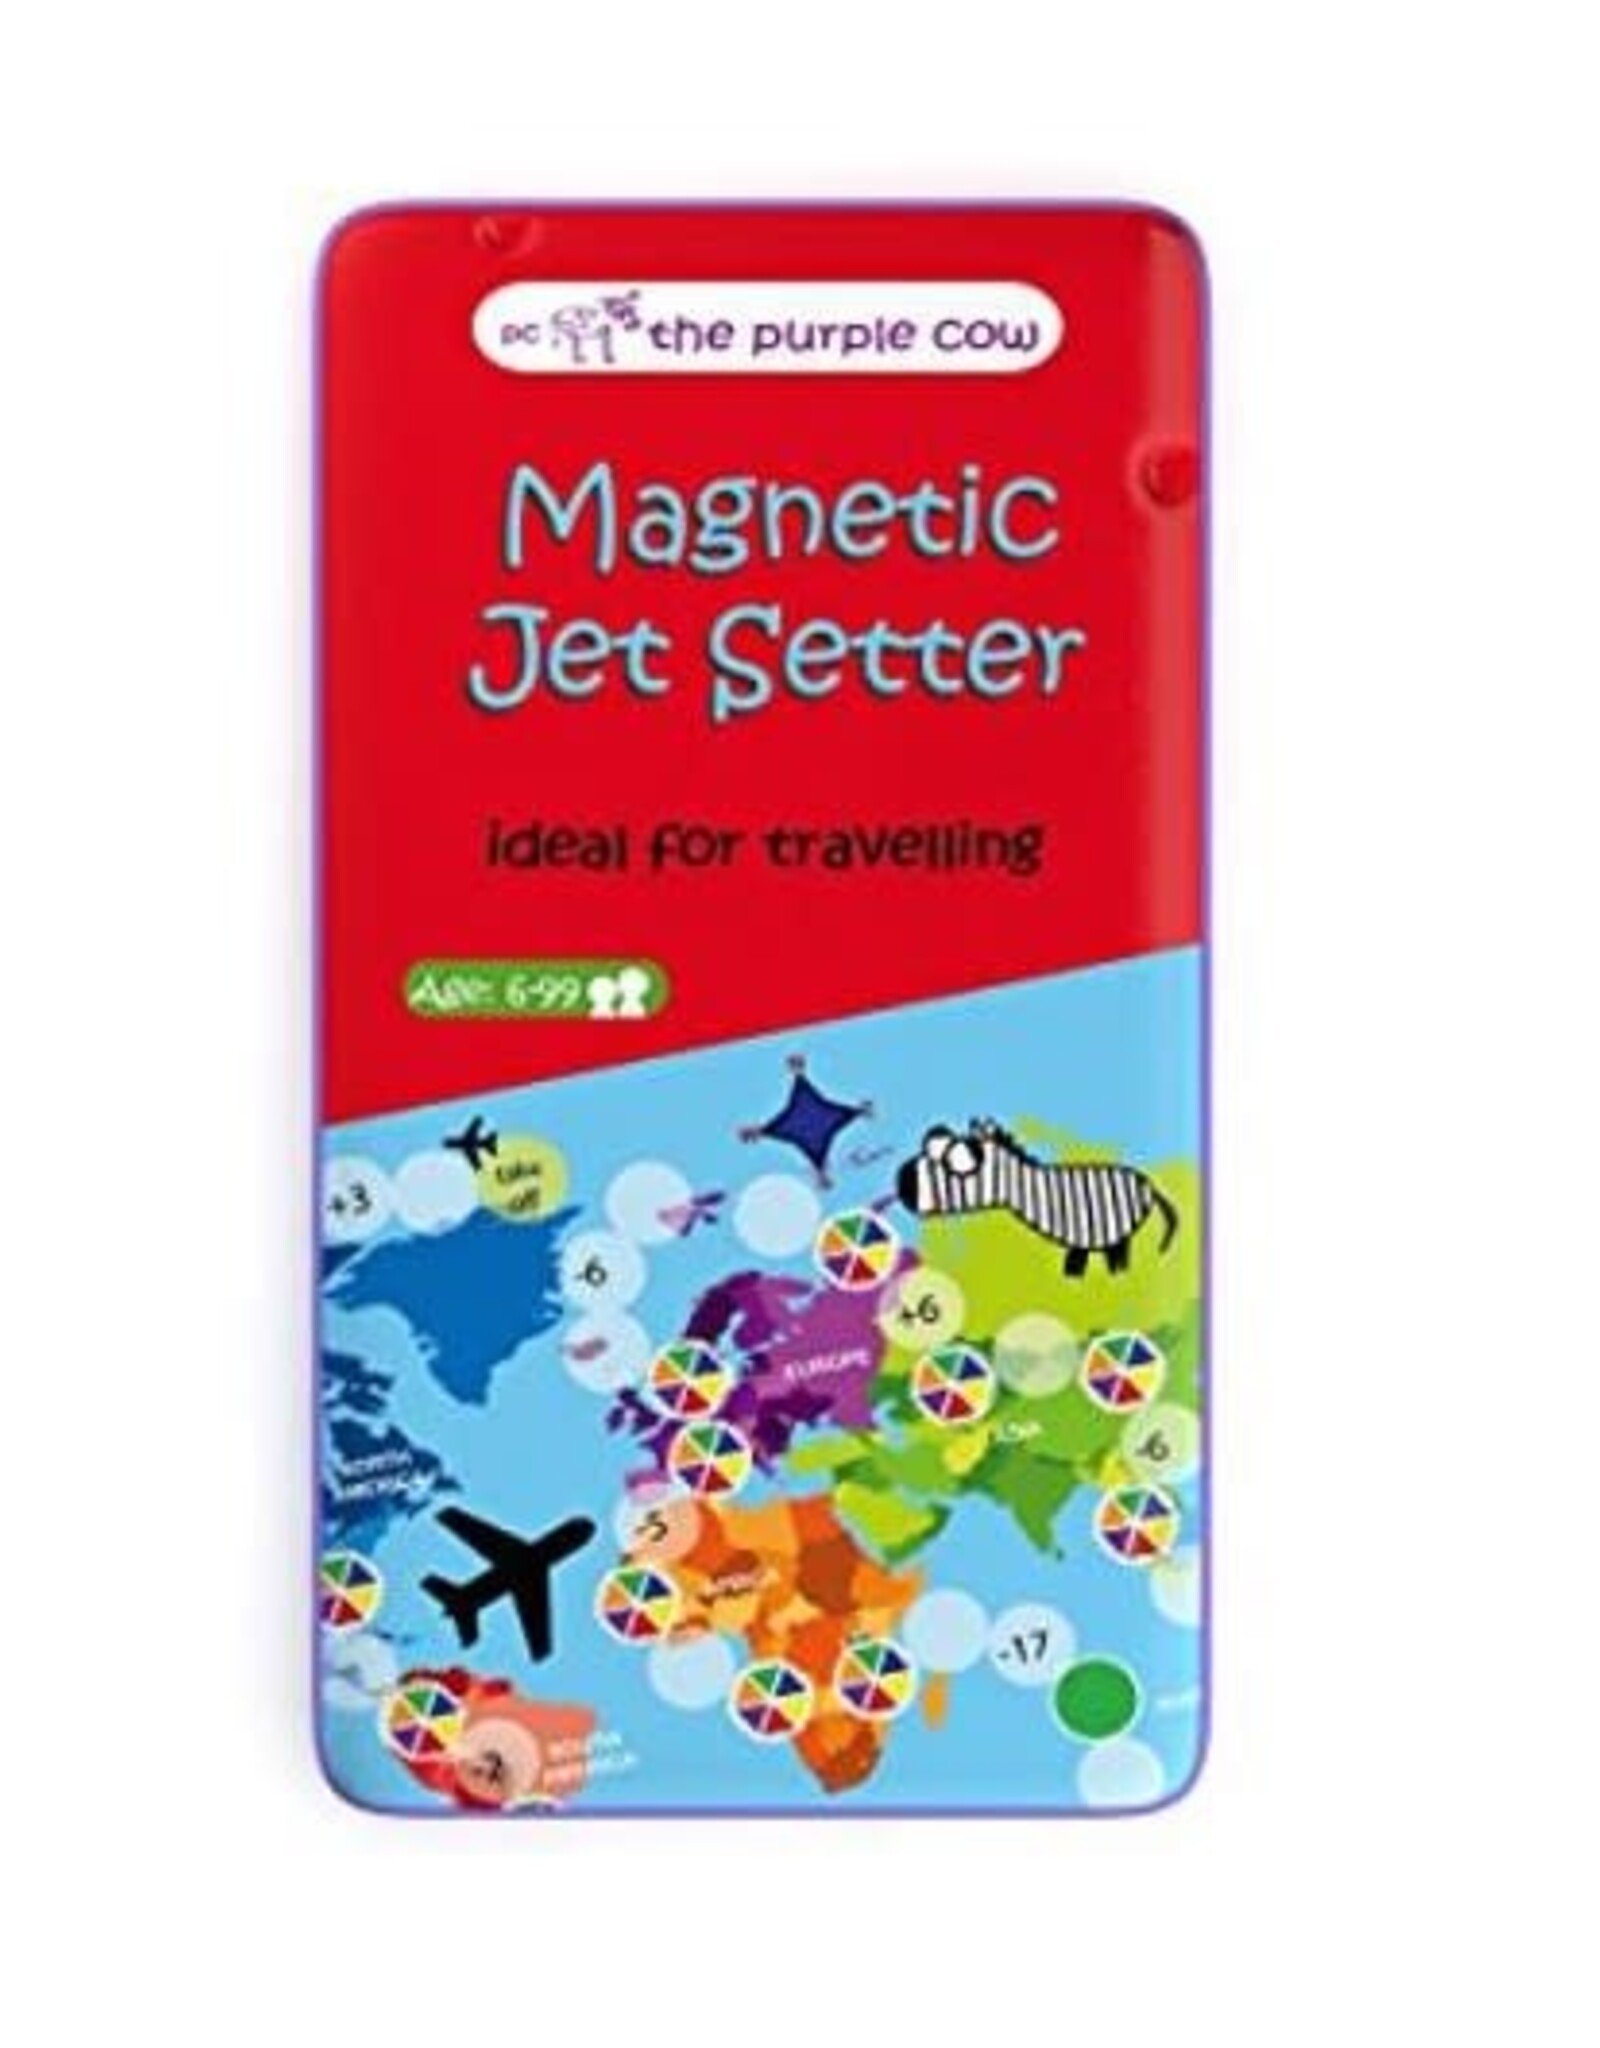 The Purple Cow Magnetic Jet Setter Travel Game